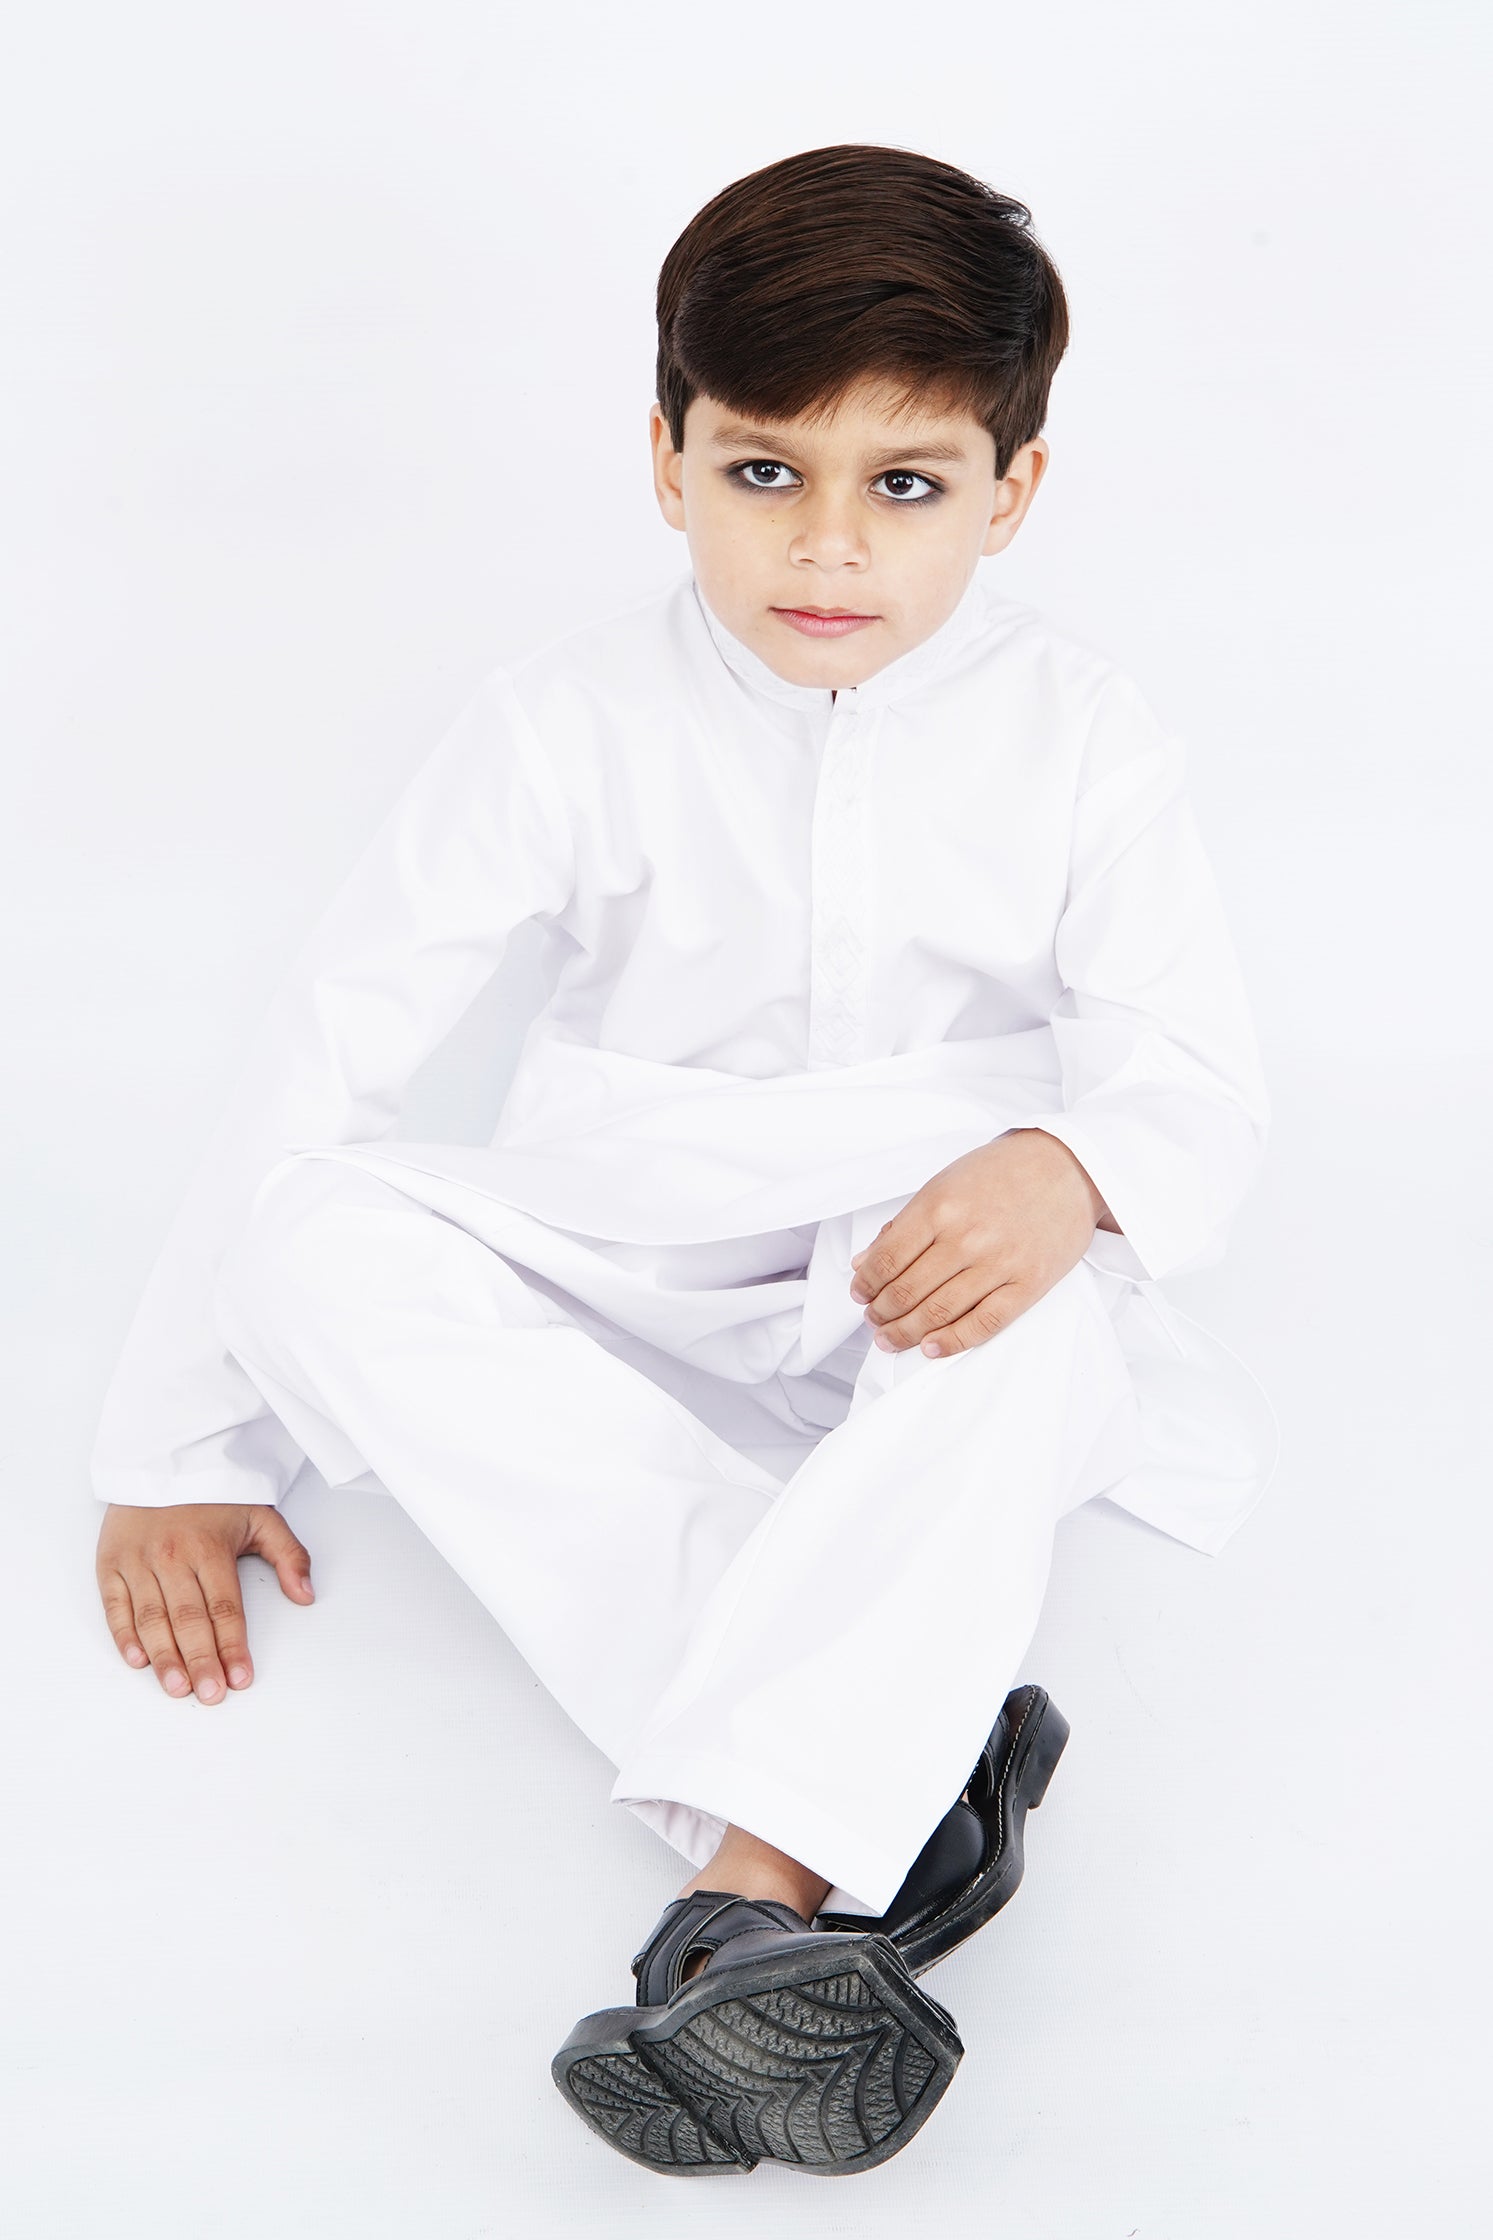 BOYS SUIT WHITE WITH EMB